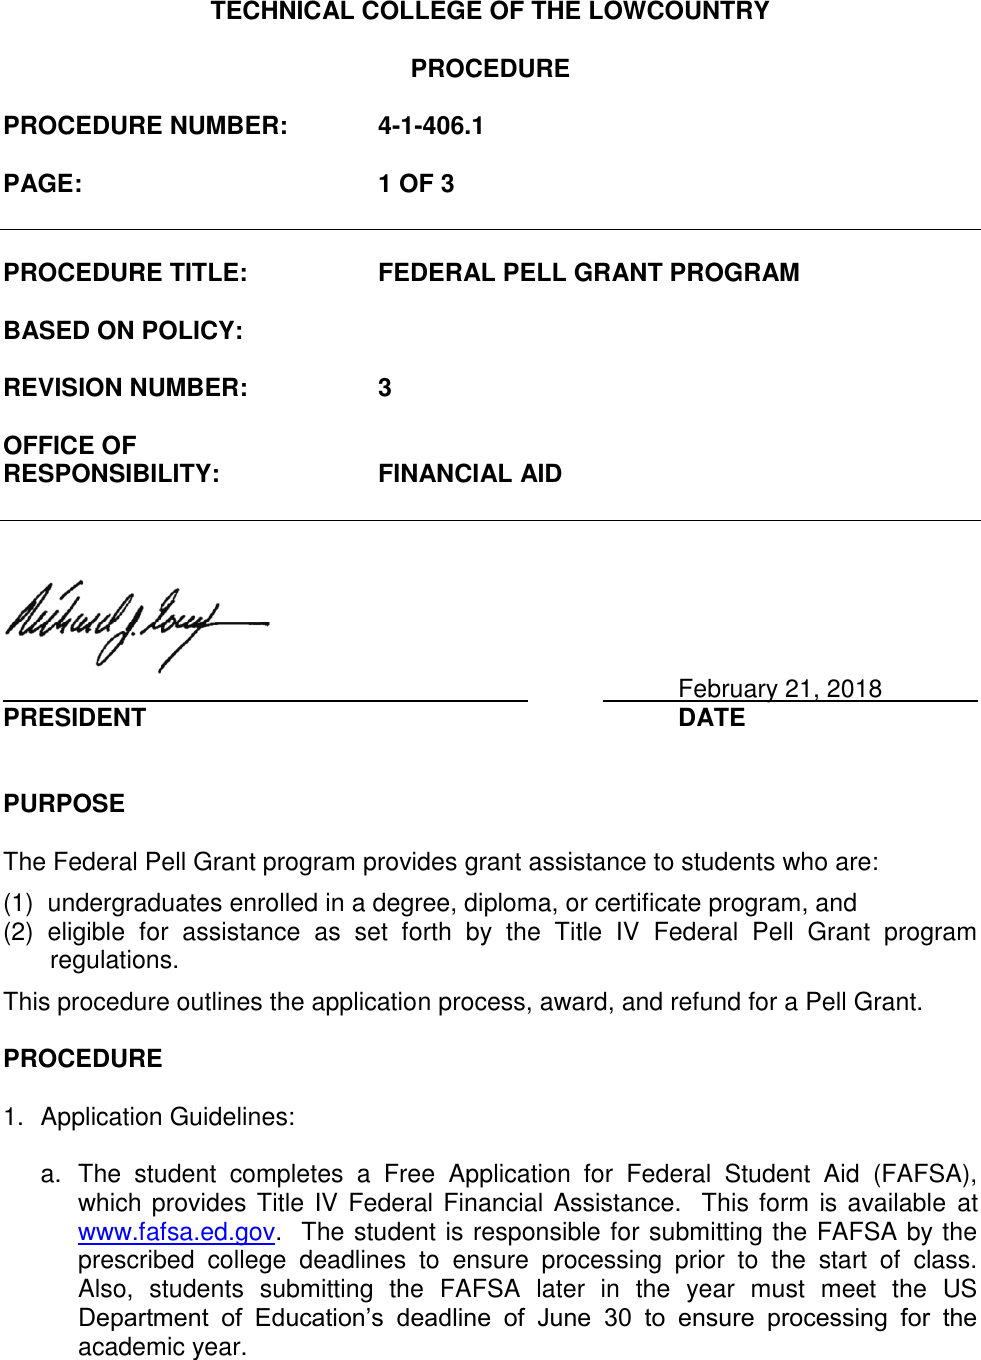 Page 1 of 3 - 4-1-406.1-Federal-Pell-Grant-Program